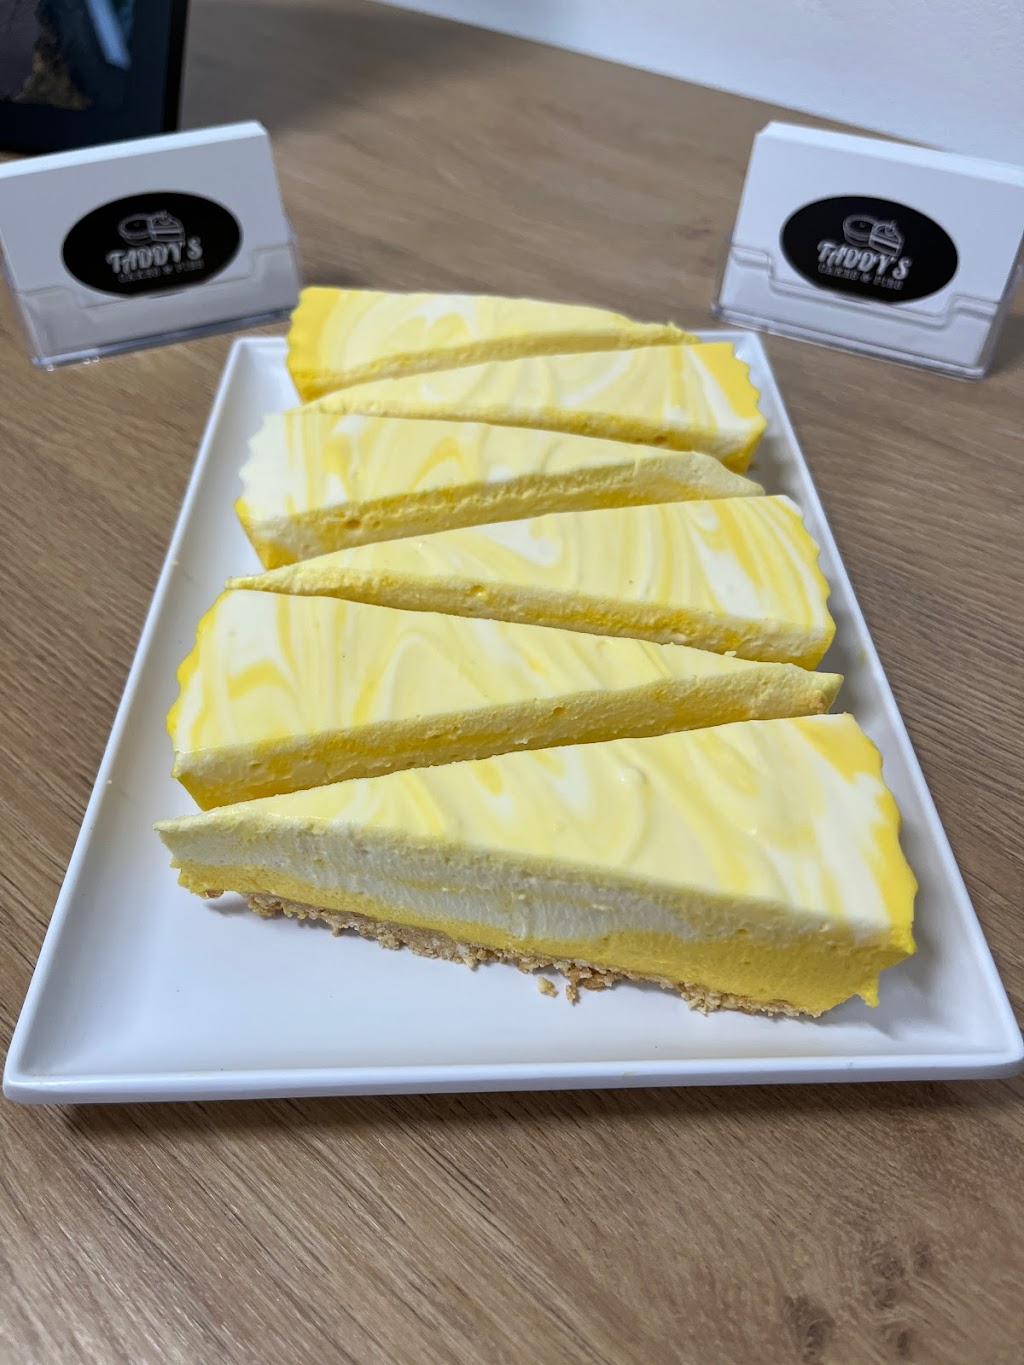 Taddys Cakes and Pies | bakery | 1 Station St, Blaxland NSW 2774, Australia | 0434648159 OR +61 434 648 159